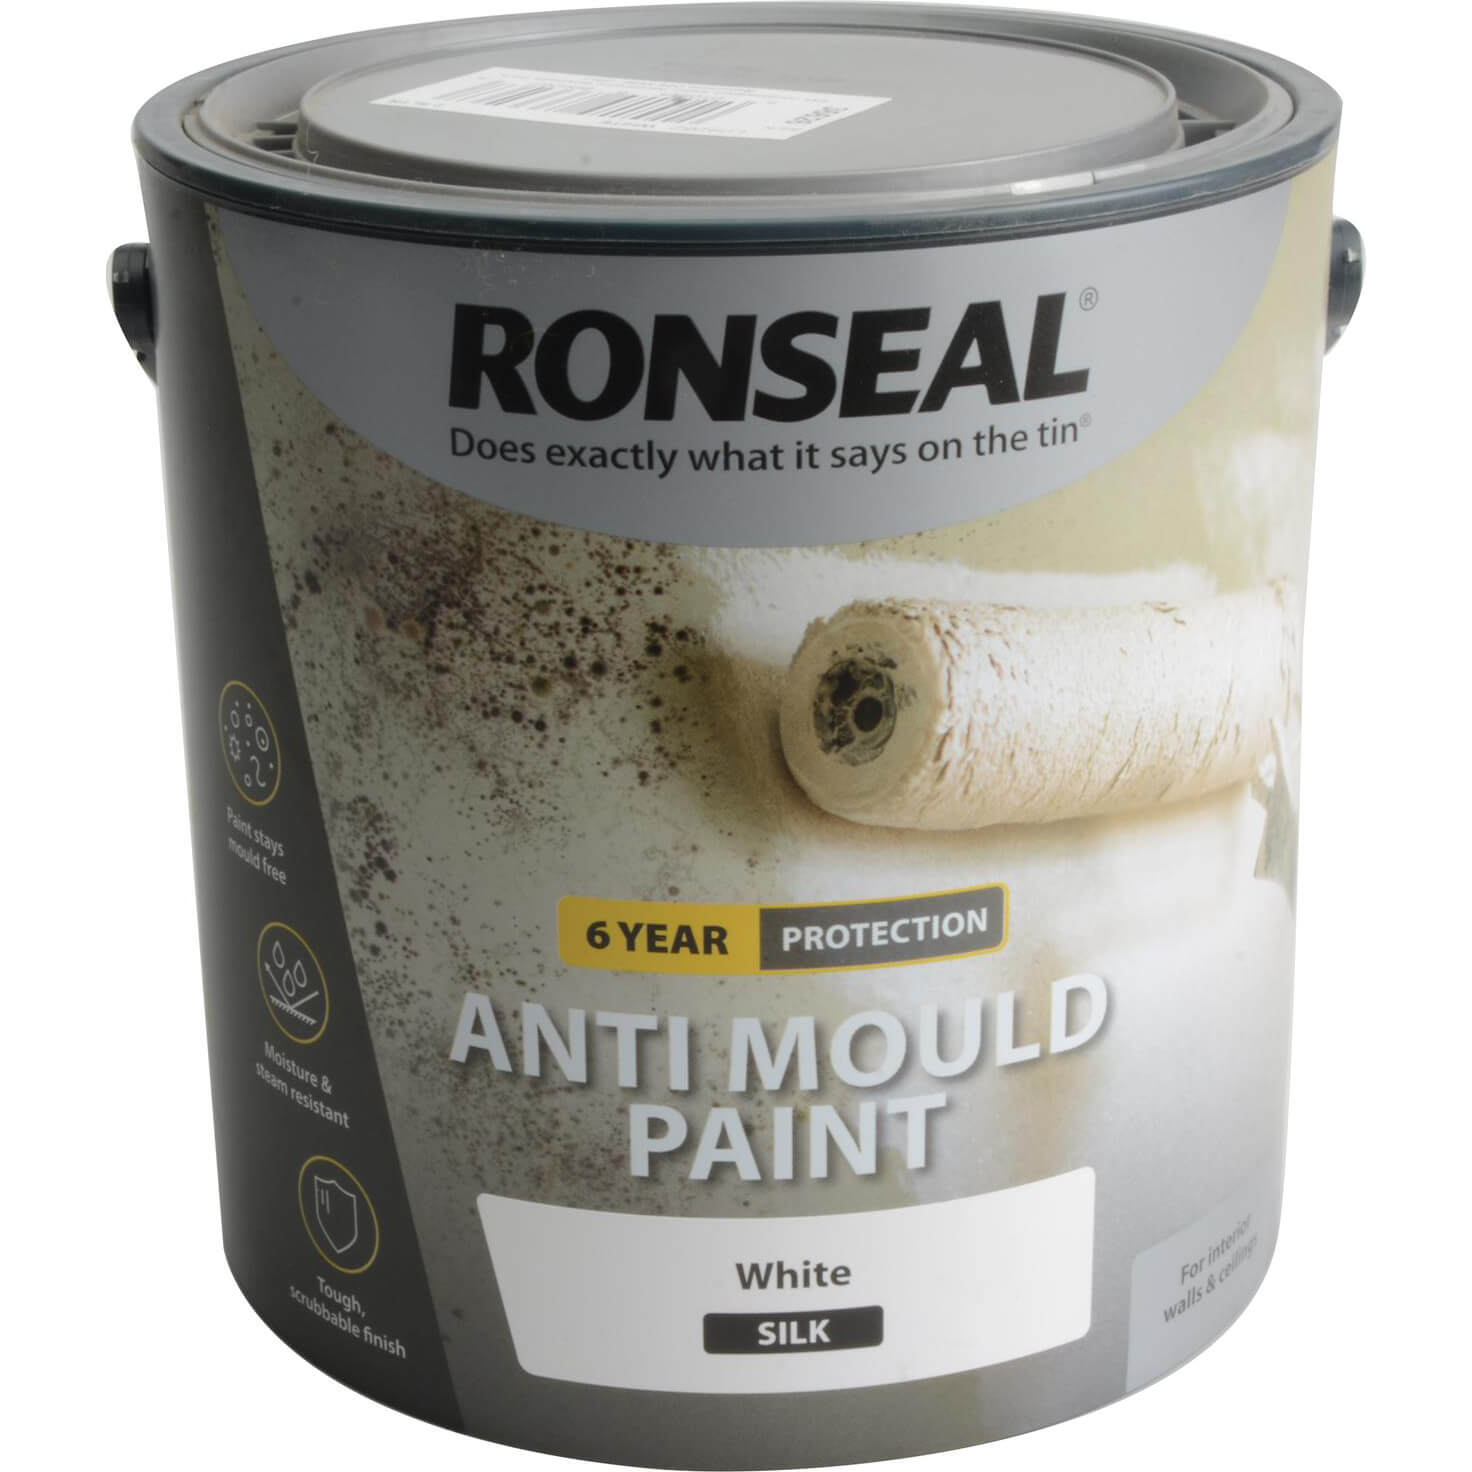 Image of Ronseal Anti Mould Paint White Silk 2.5l